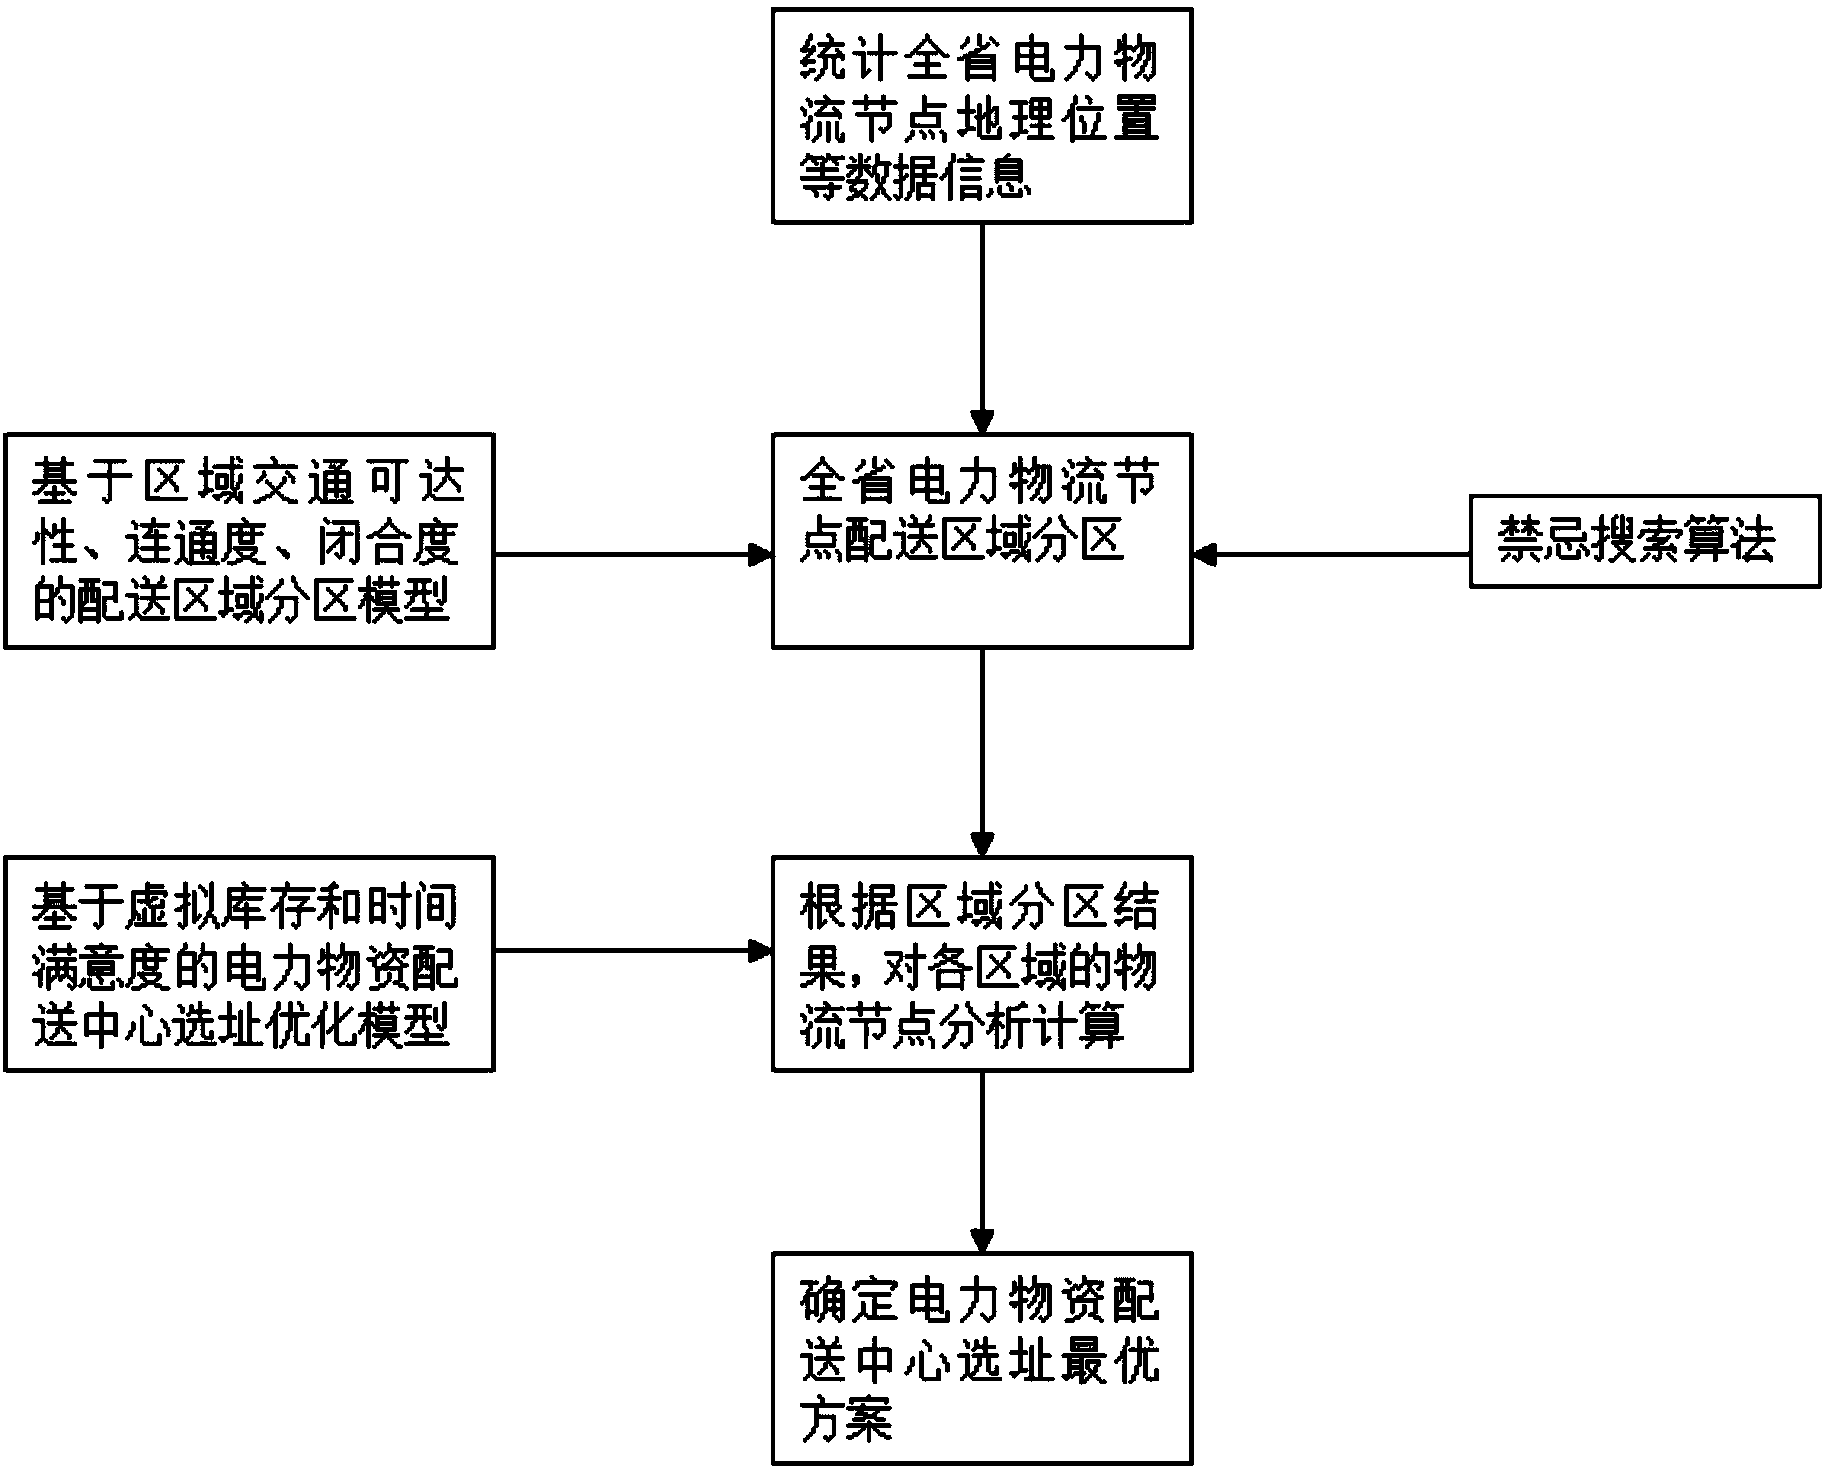 Electric power material distribution center location selection method